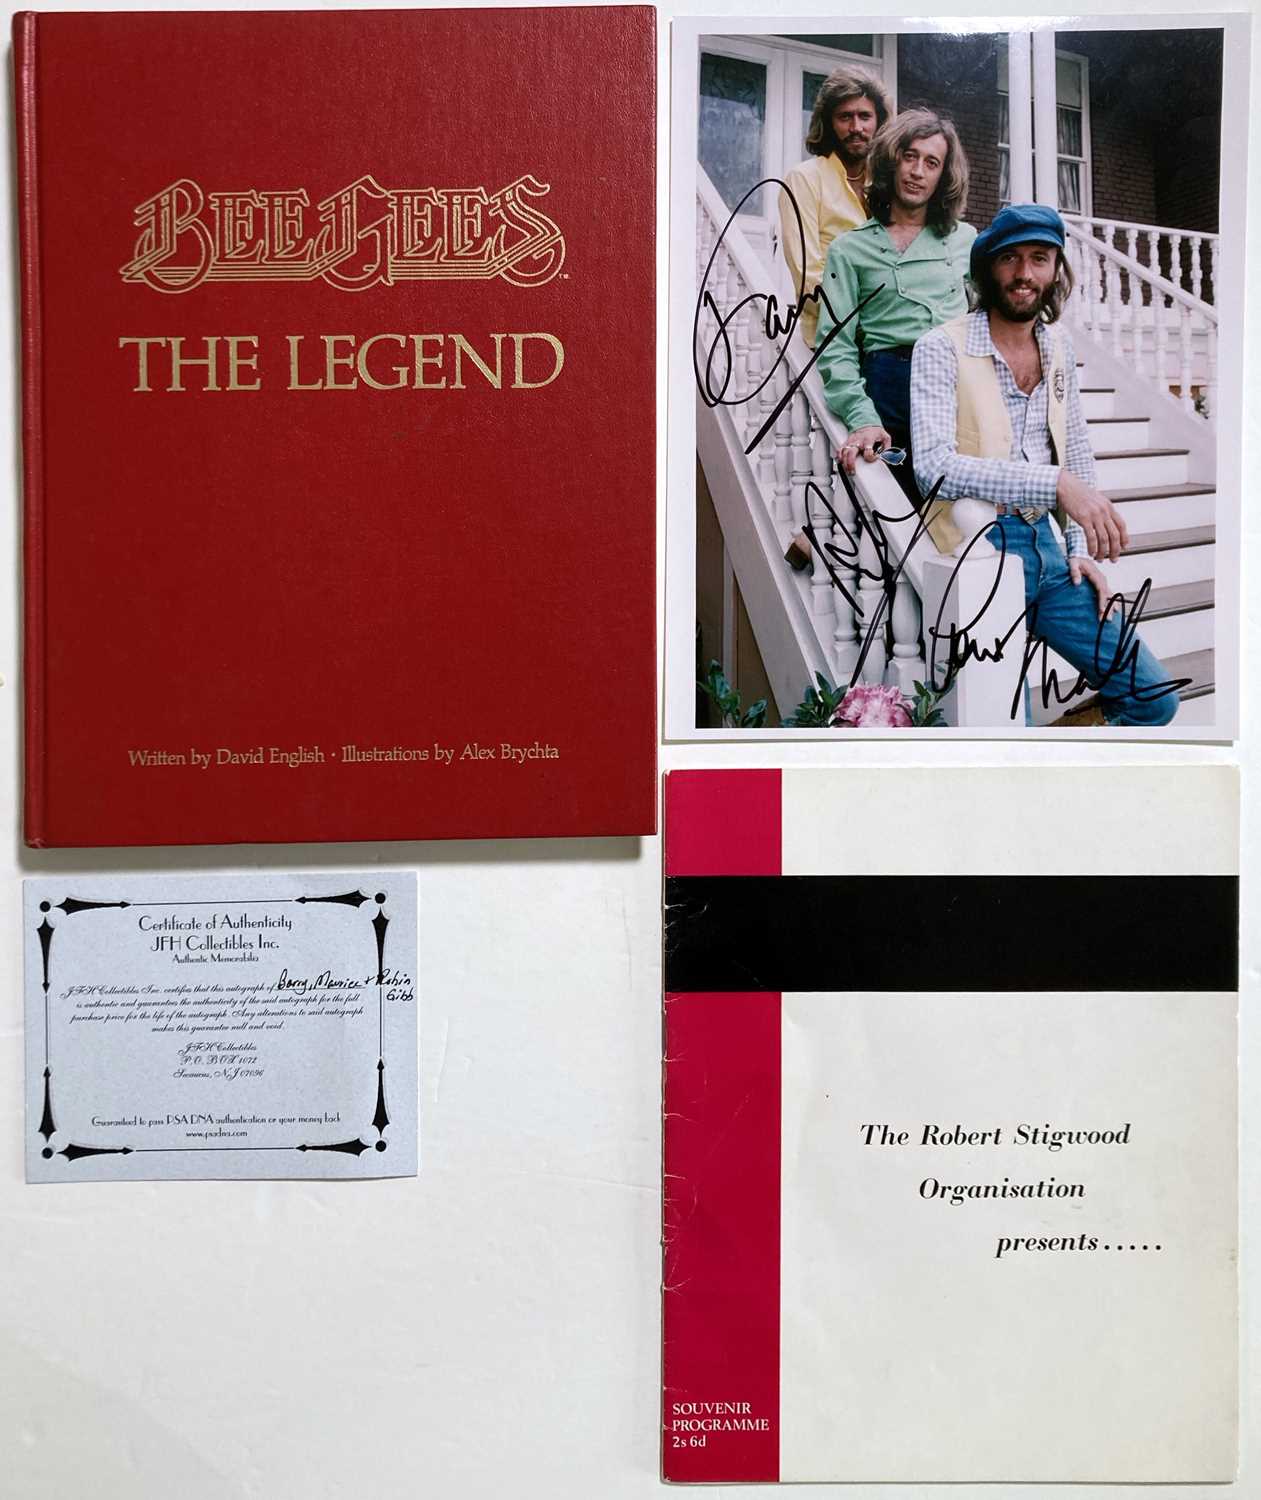 Lot 115 - THE BEE GEES - EARLY CONCERT PROGRAMME AND 1979 SPECIAL EDITION BOOK.